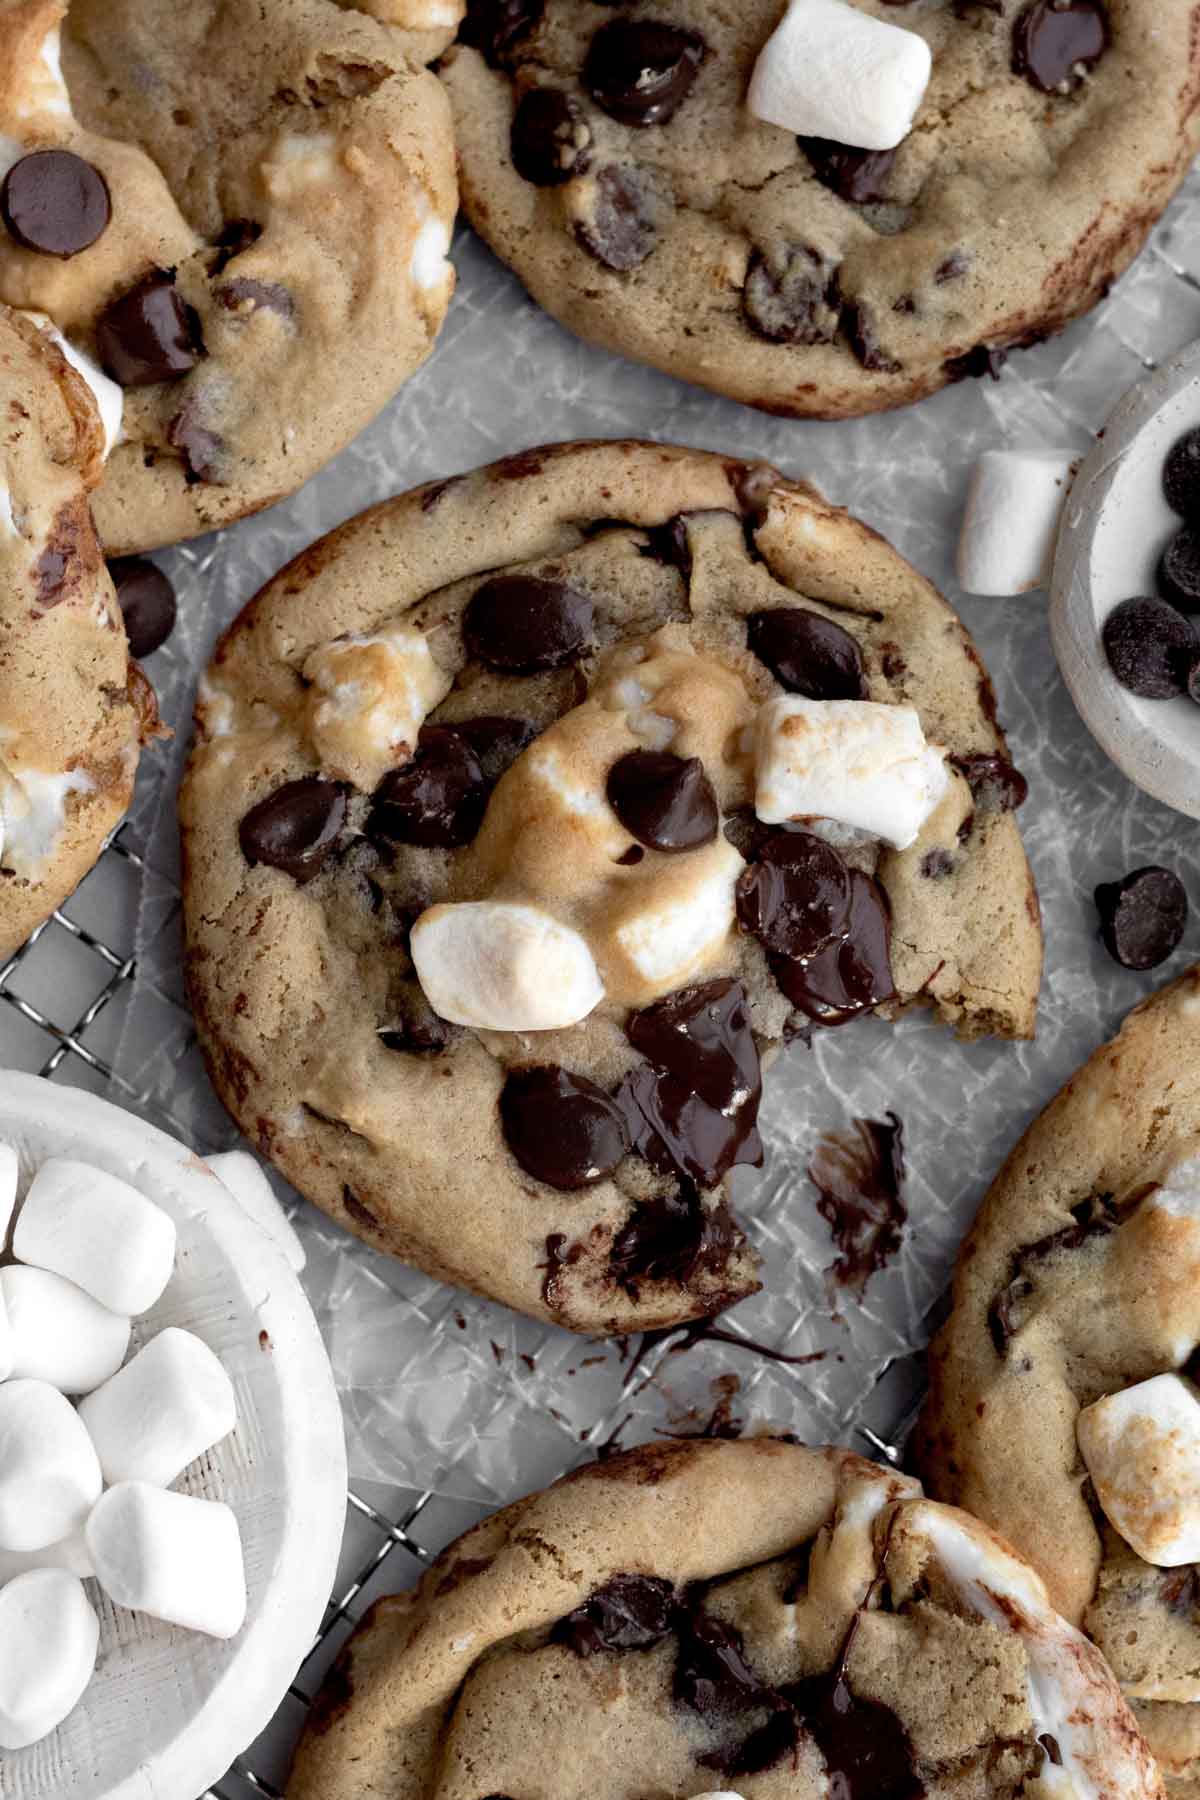 A Chocolate Chip Marshmallow Cookie with toasted marshmallows and warm chocolate chips with a bite taken.